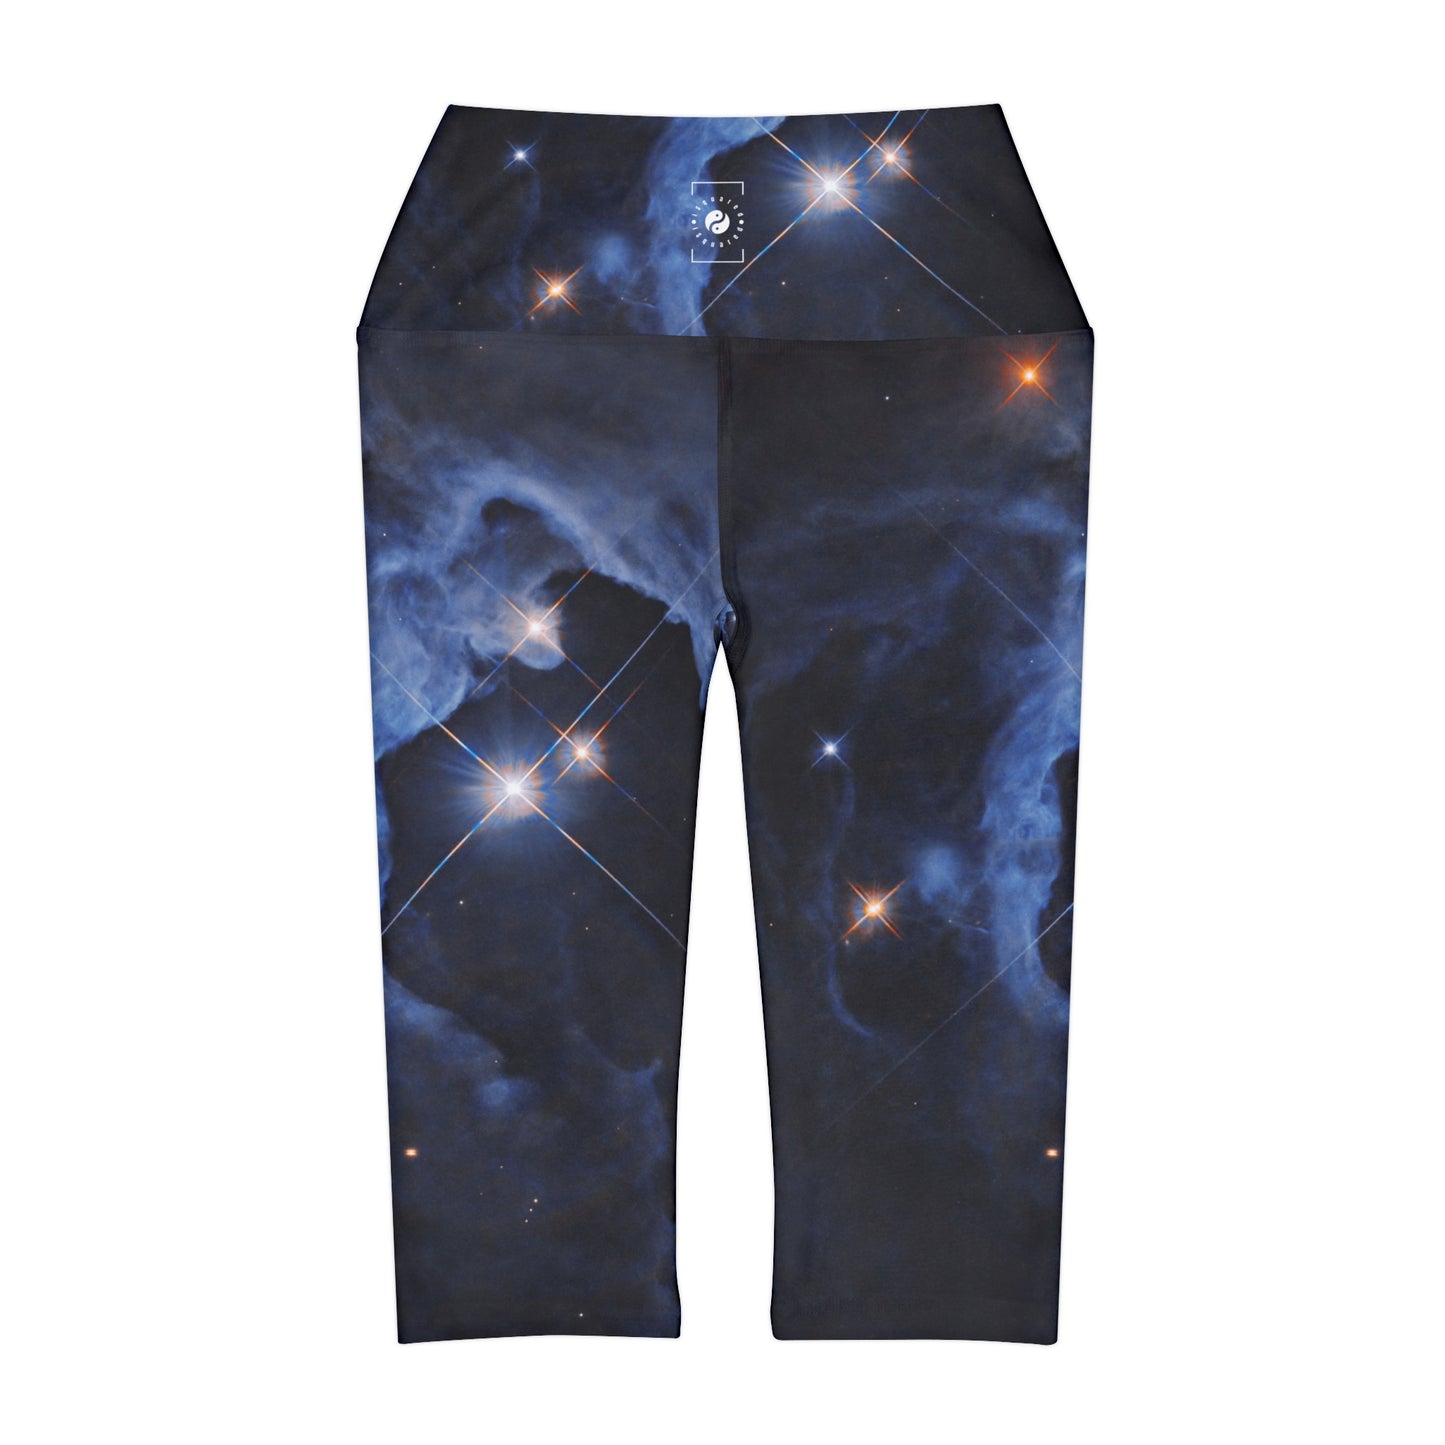 HP Tau, HP Tau G2, and G3 3 star system captured by Hubble - High Waisted Capri Leggings